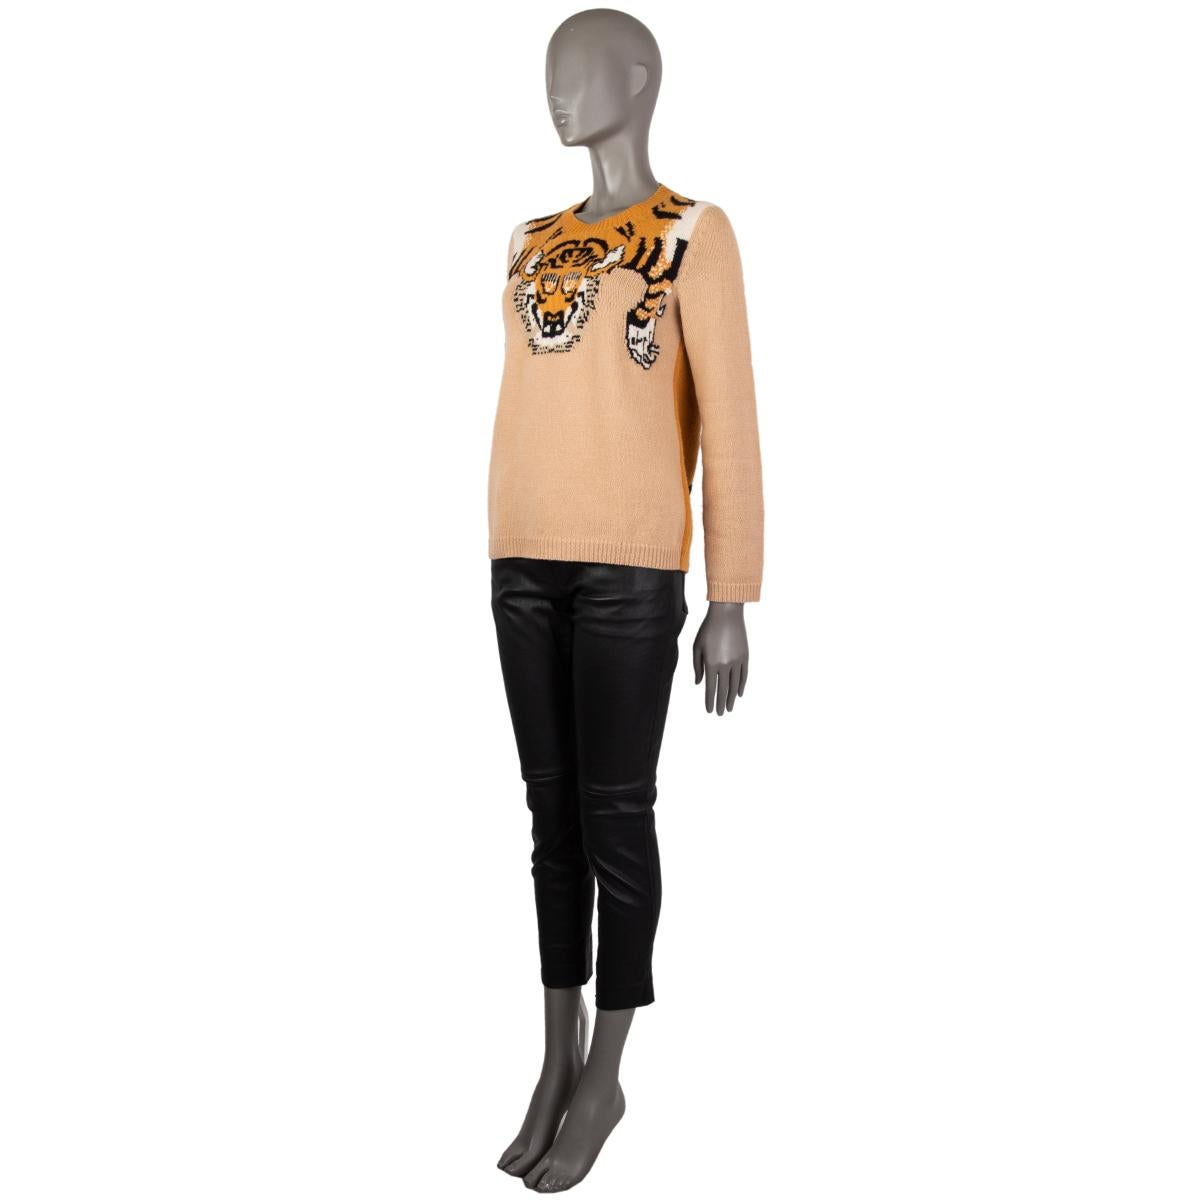 Gucci tiger sweater in beige, black, pumpkin, and off-white wool (100%). With crew neck and ribbeddetails. Has been worn and is in excellent condtion. 

Tag Size L
Size L
Shoulder Width 36cm (14in)
Bust 98cm (38.2in) to 118cm (46in)
Waist 98cm